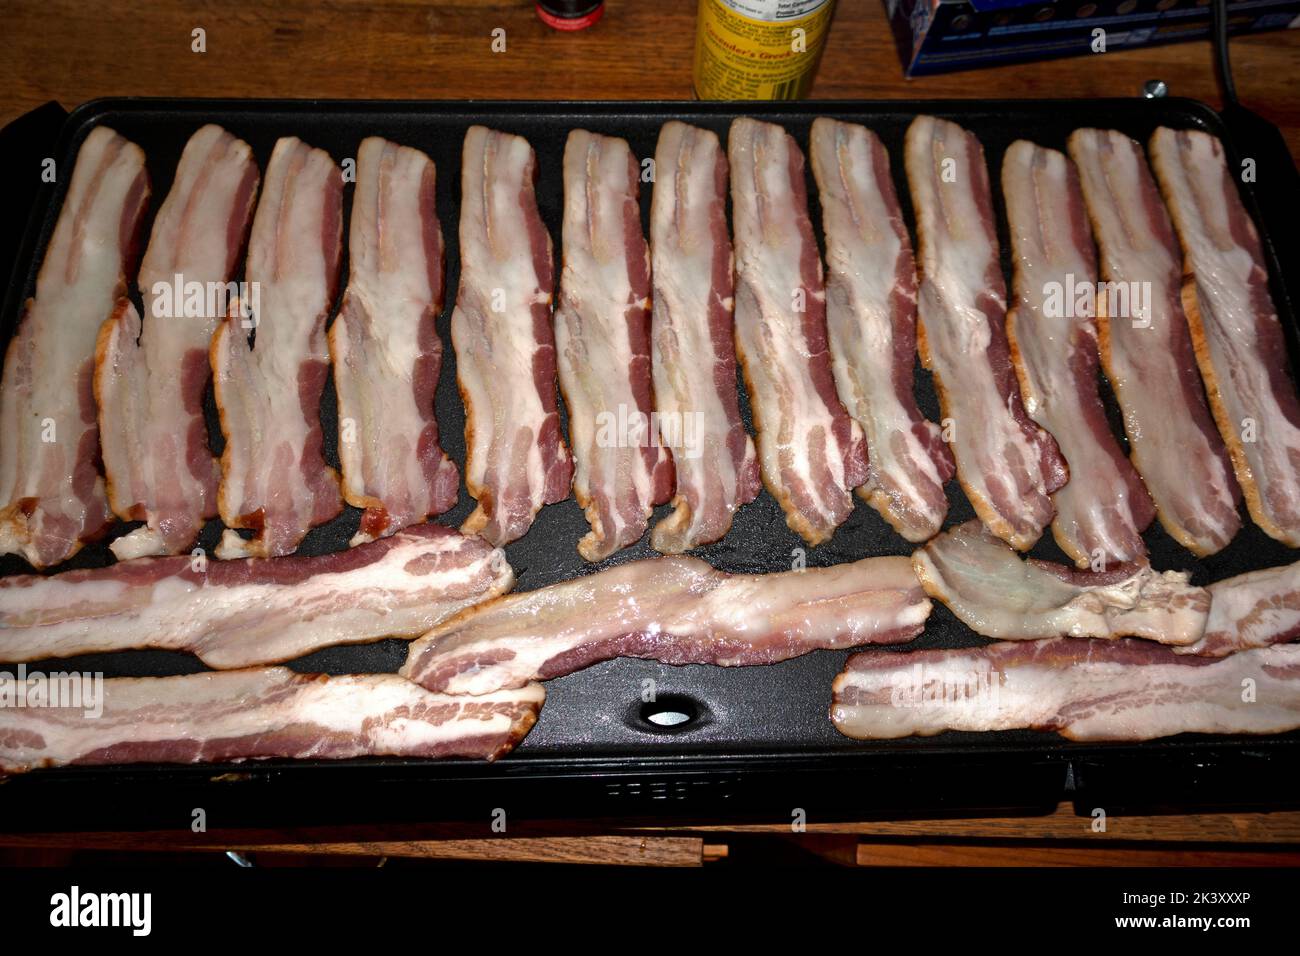 Artistically arranged bacon frying on a portable electric grill at home. Clitherall Minnesota MN USA Stock Photo